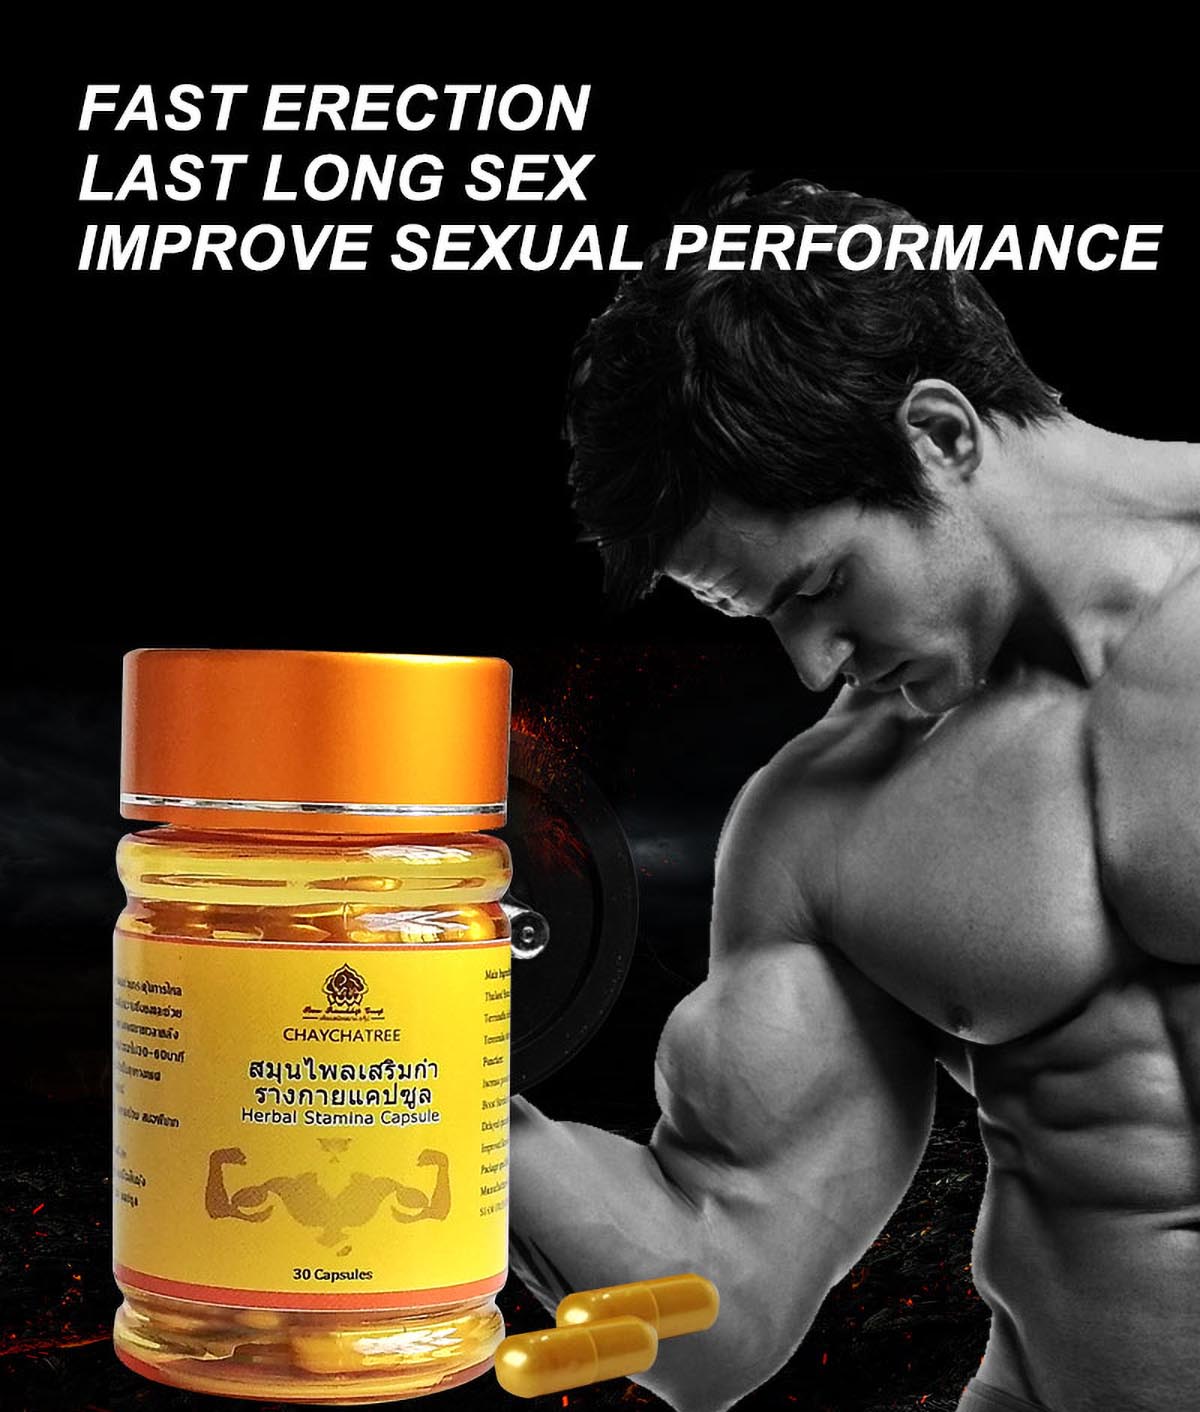 best pills for male stamina